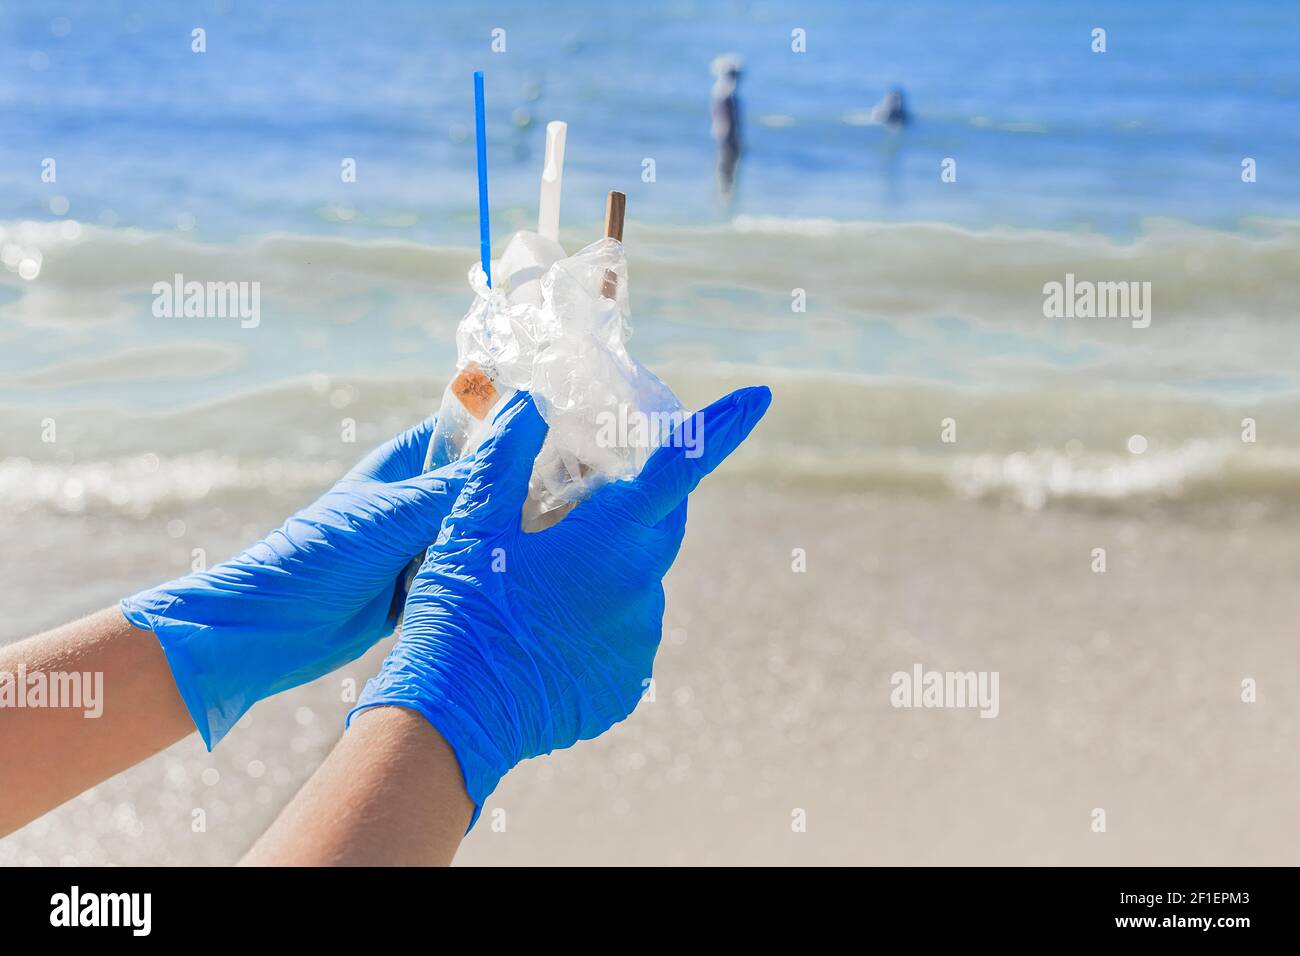 Hands in blue protective household gloves hold a pile of garbage in a bag against the sea. Waste disposal. Stock Photo